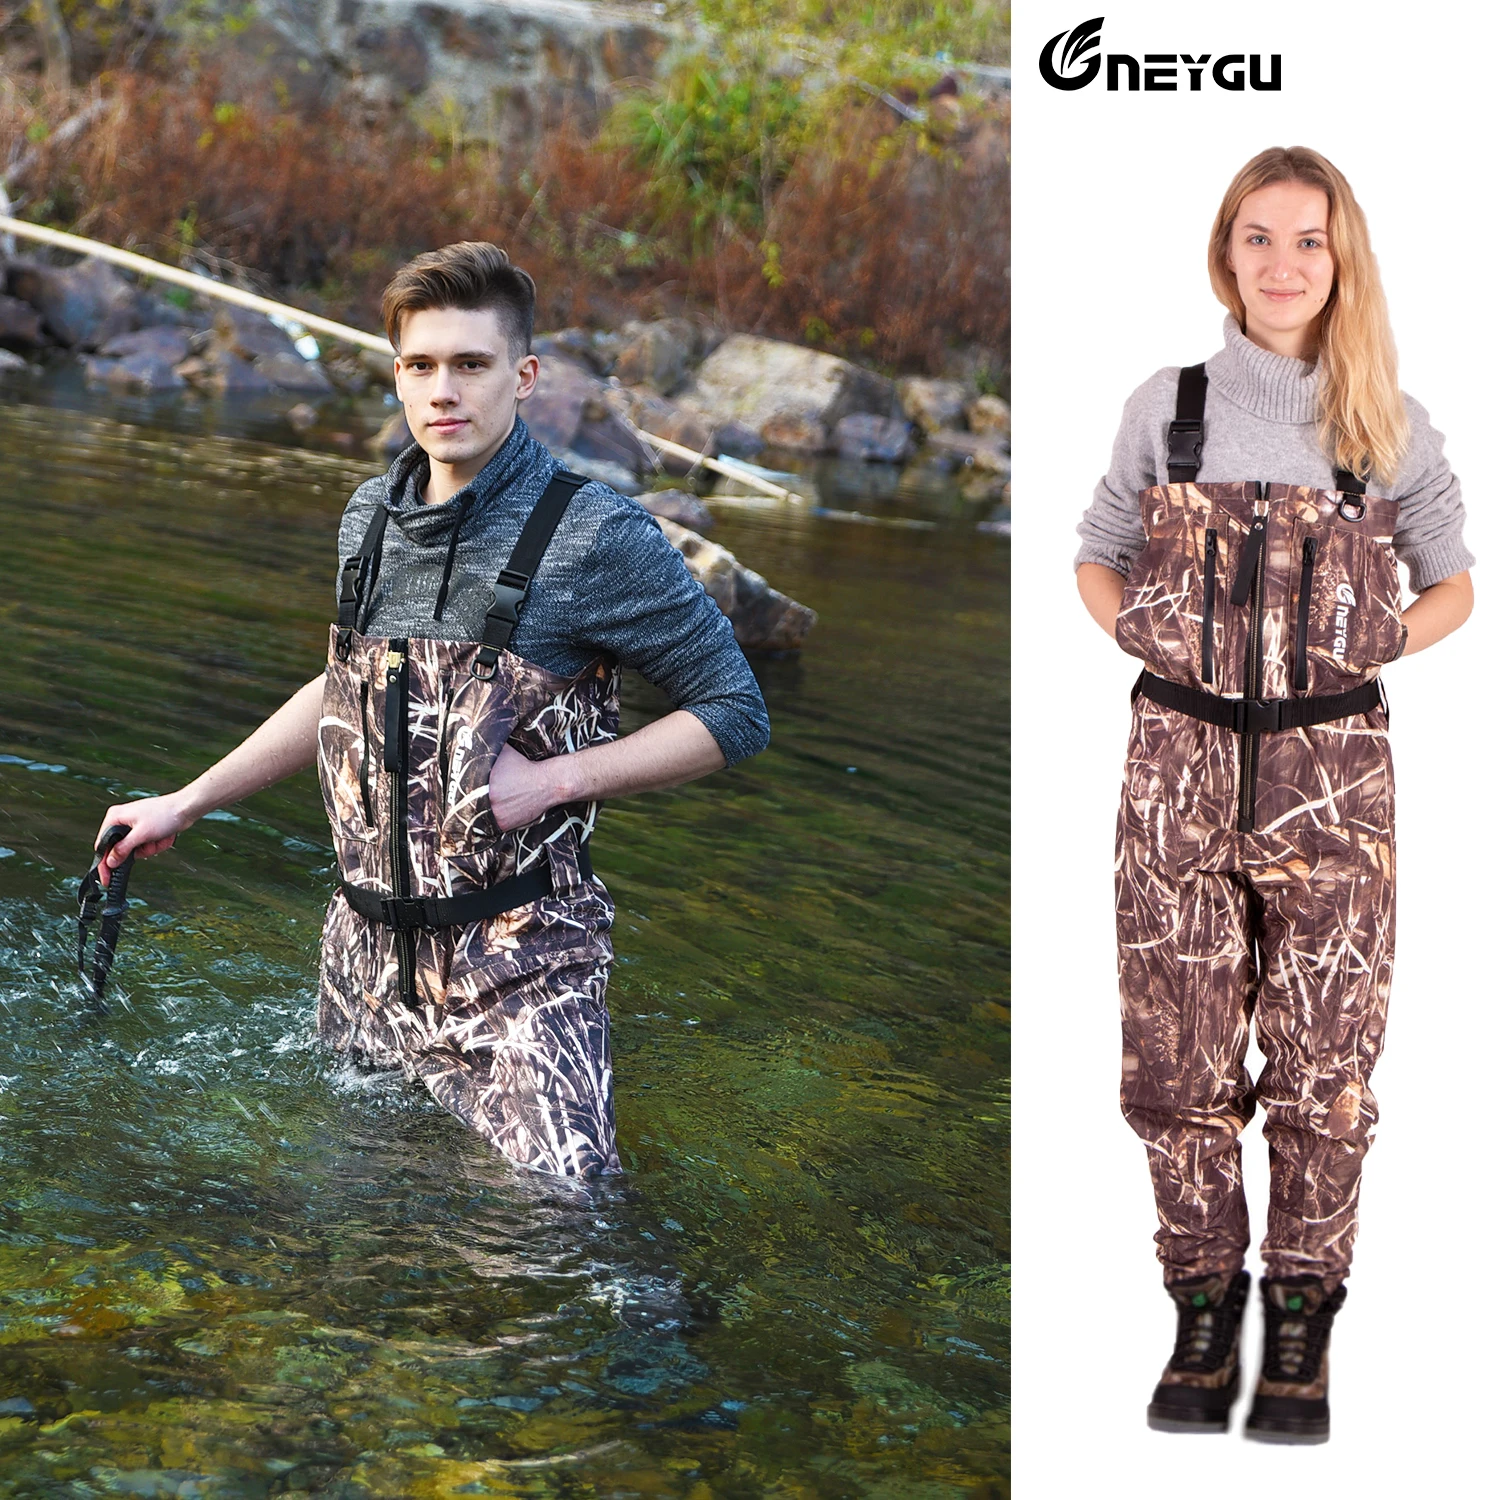 https://ae01.alicdn.com/kf/Hde324e2d7e234934aa71d341a37c5dc1Q/Men-s-Breathable-Waterproof-Fishing-Waders-For-Fly-fishing-Fishing-chest-Wader-With-Neoprene-Socks-For.jpg